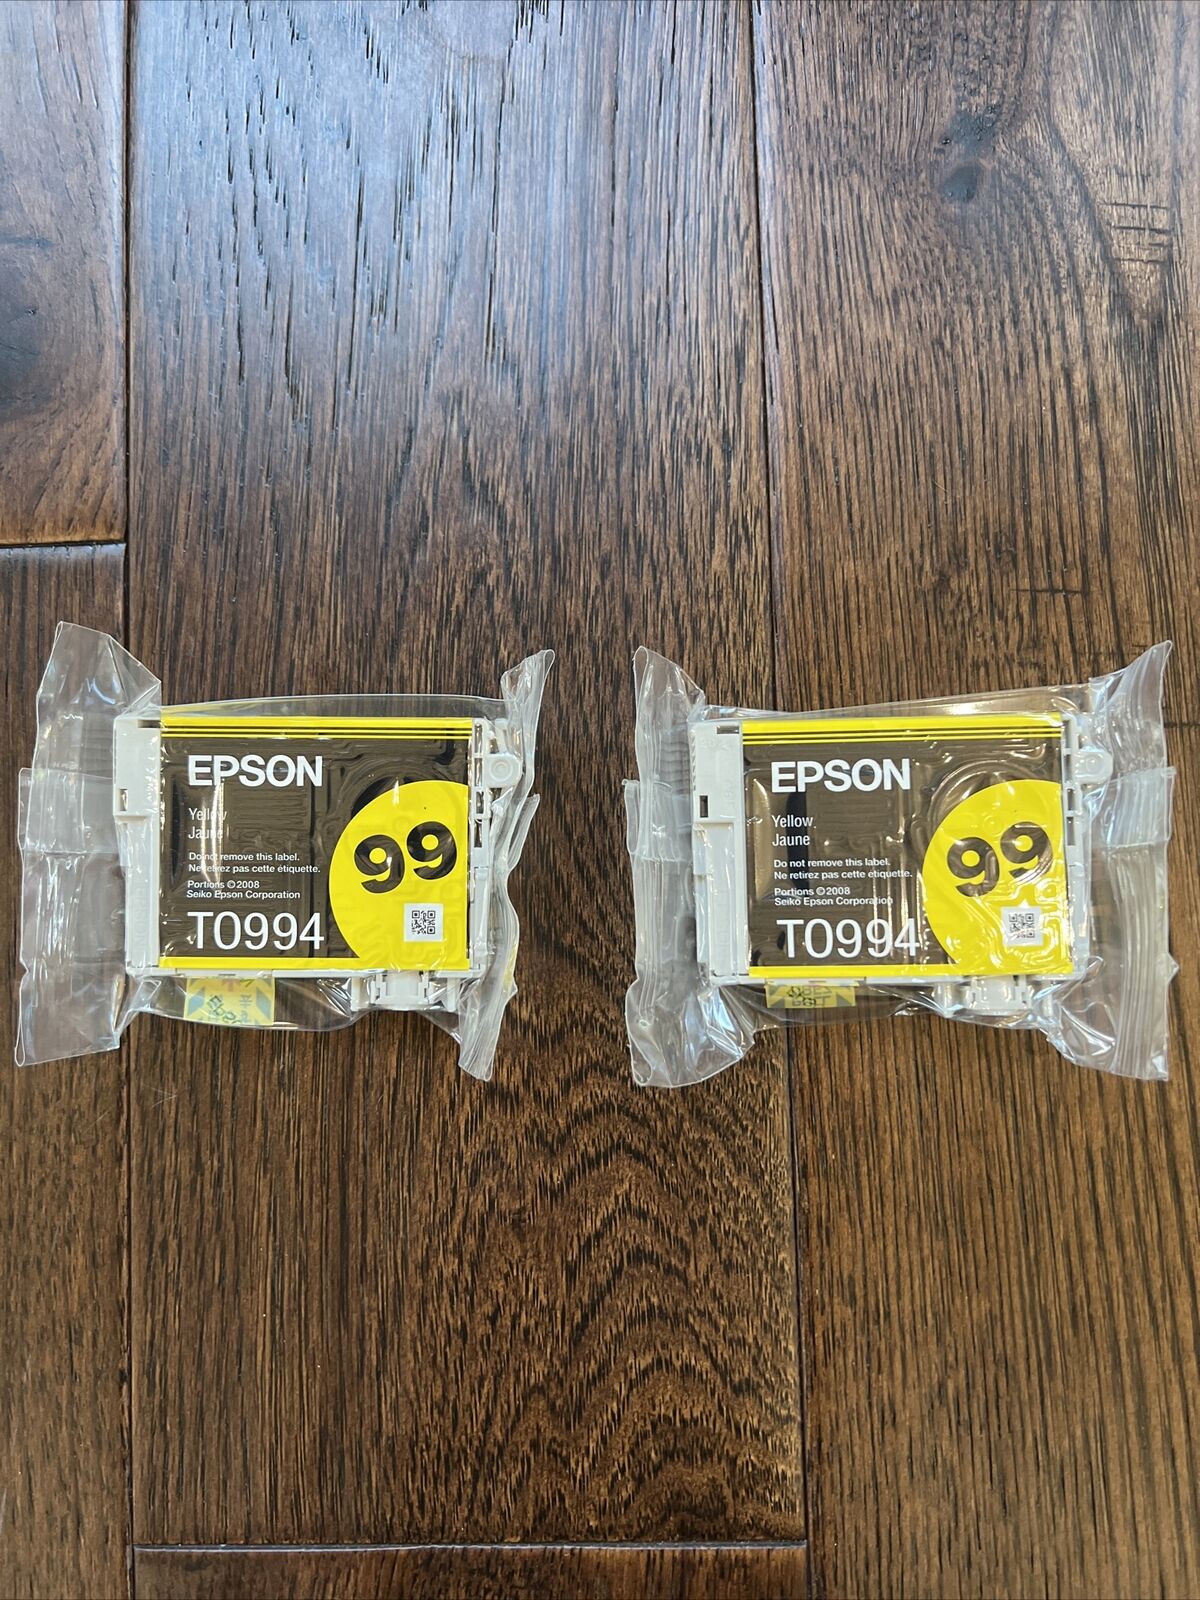 Epson 99 Ink Cartridges Two Yellow T0994 Genuine Open Box